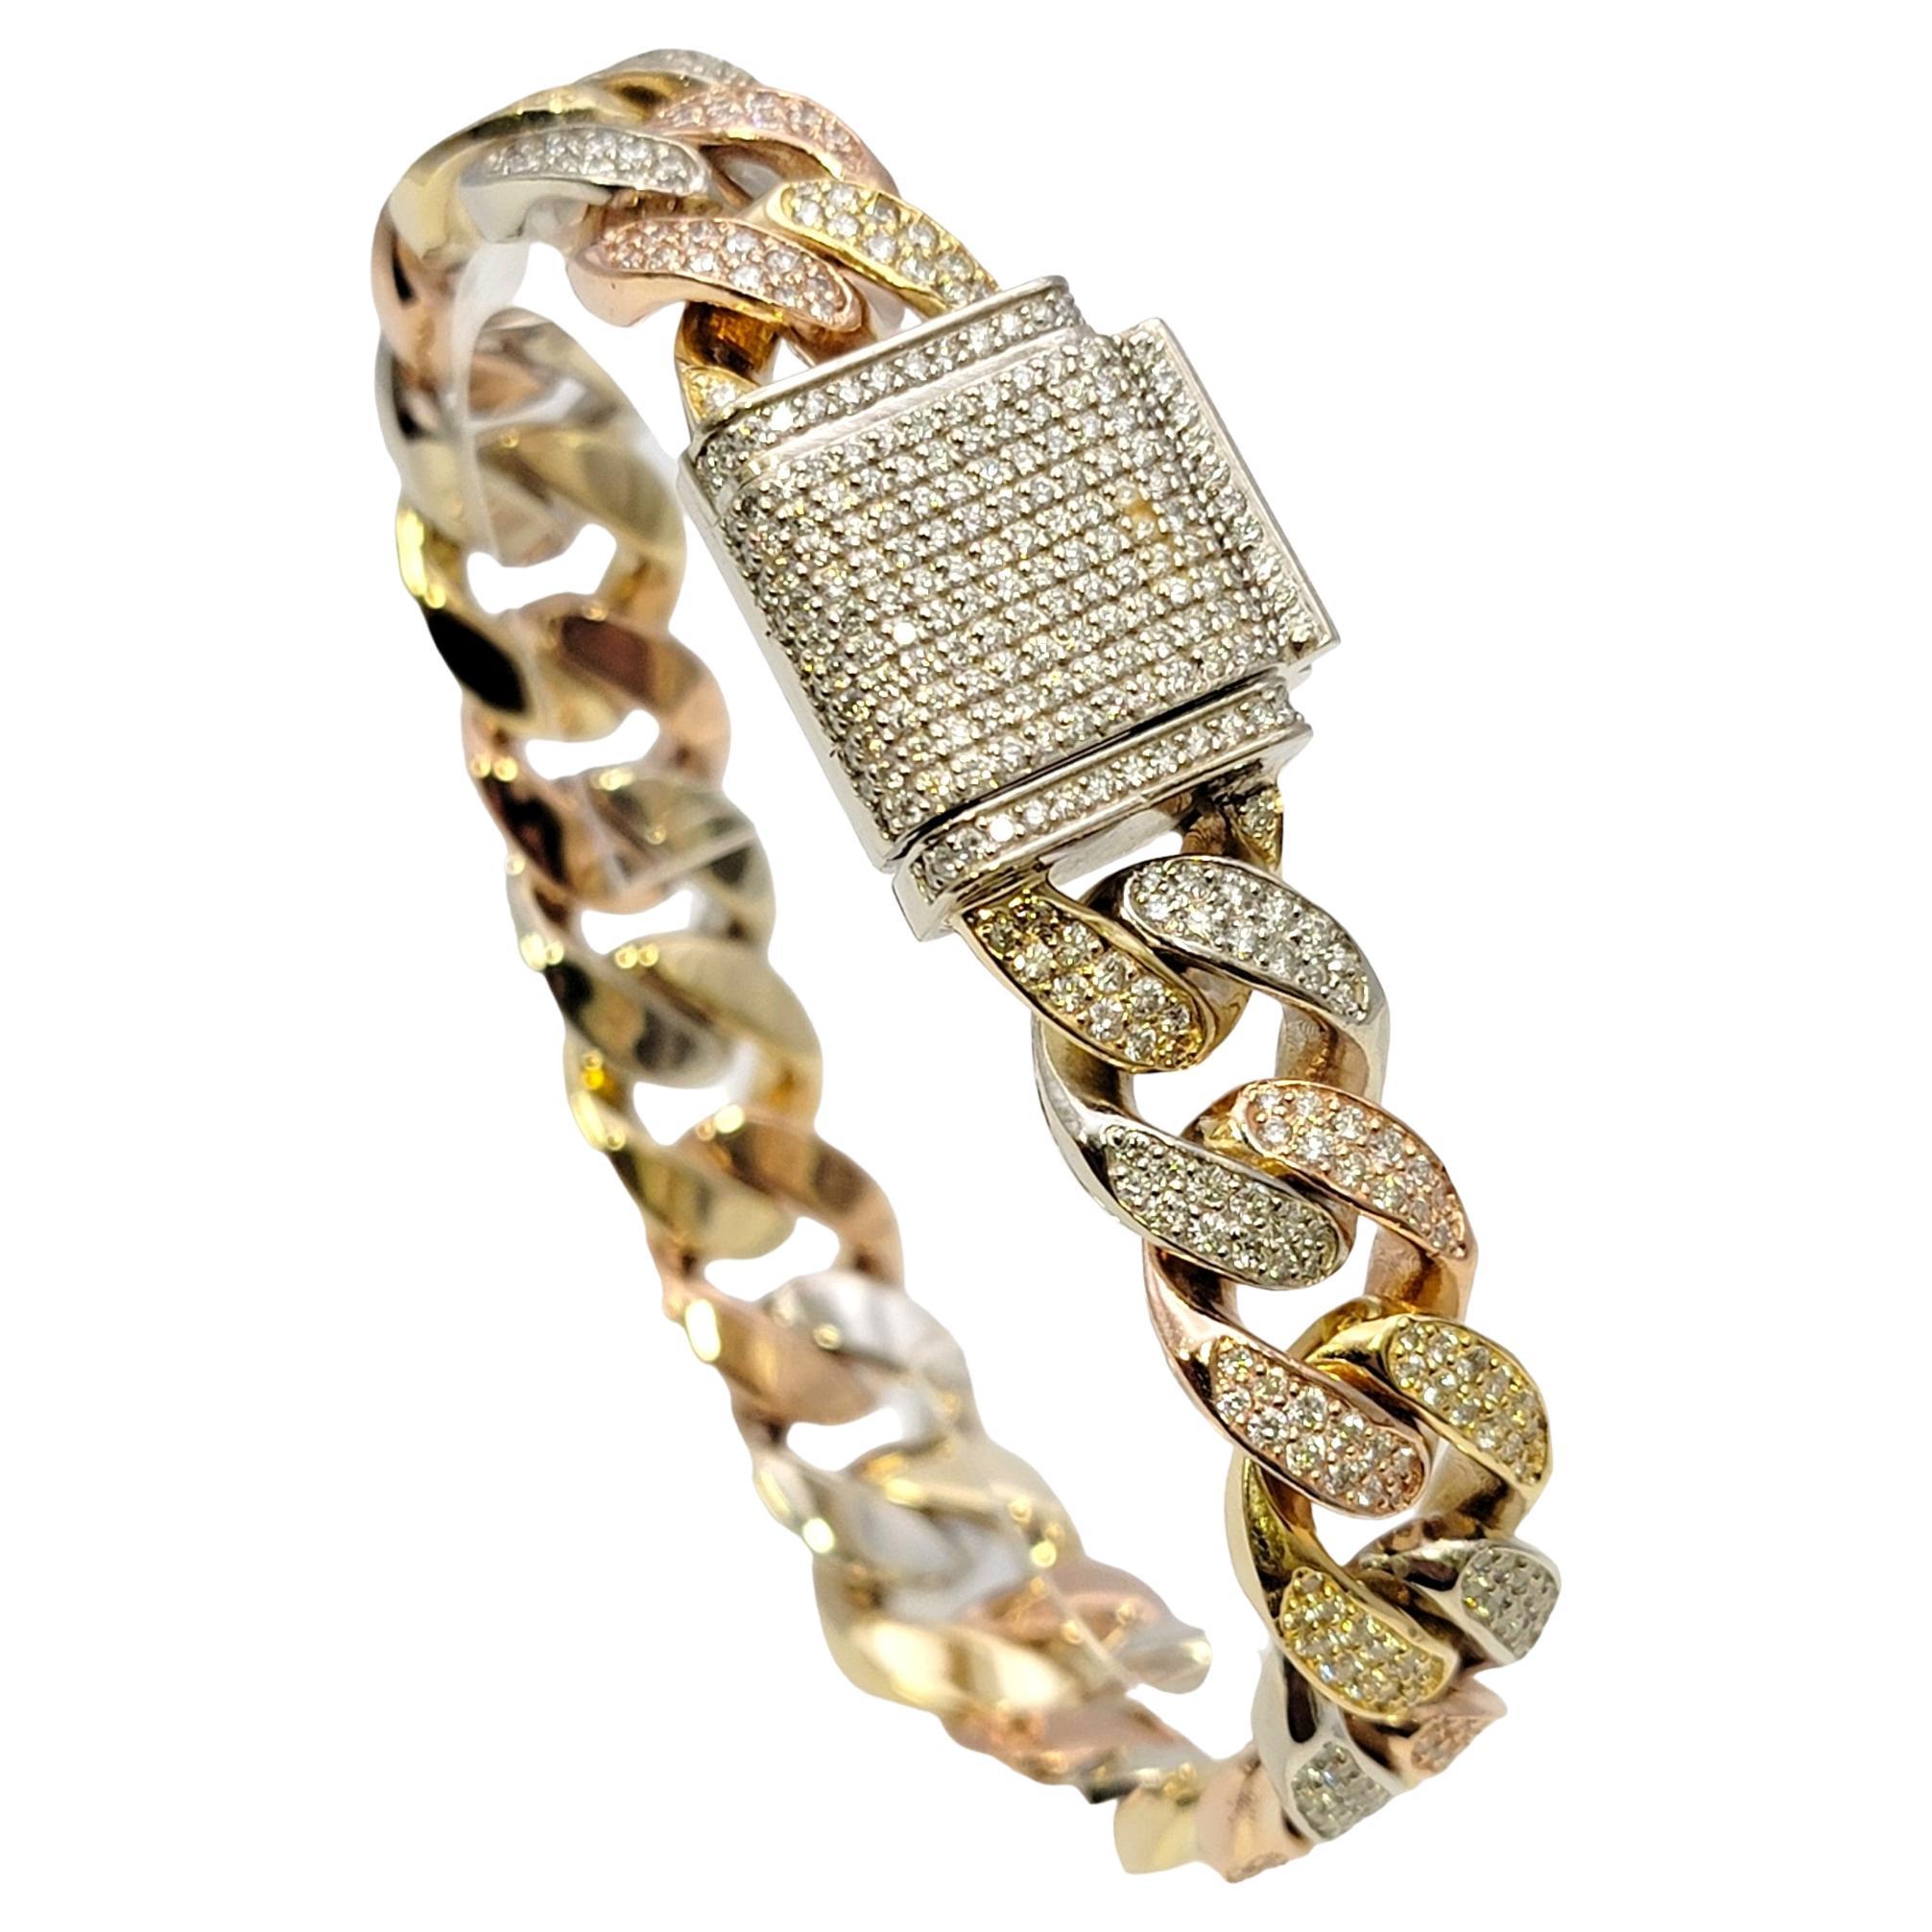 Impressive unisex cuban link bracelet with glittering pave diamonds. The wide, tri-toned links hug the wrist for a comfortable and secure fit, while the shimmering diamonds sparkle from all angles. 

This striking bracelet features chunky cuban